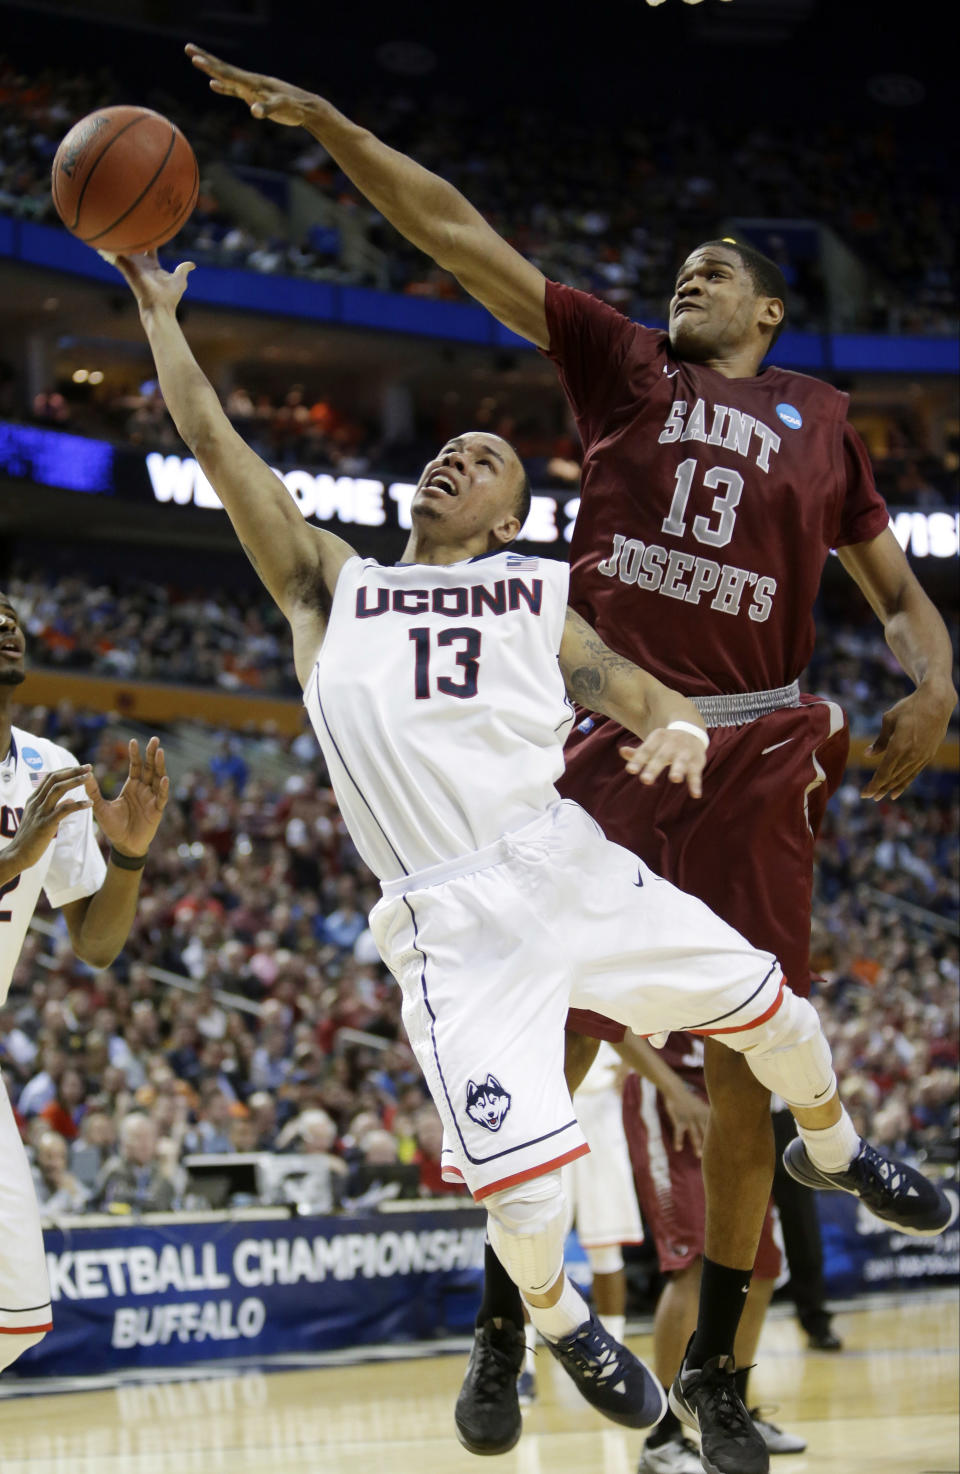 FILe - In this March 20, 2014 file photo, Connecticut's Shabazz Napier (13) drives past Saint Joseph's Ronald Roberts, Jr. (13) during the second half of a second-round game in the NCAA college basketball tournament in Buffalo, N.Y. Napier was selected to The Associated Press All-America team, released Monday, March 31, 2014. (AP Photo/Nick LoVerde, File)